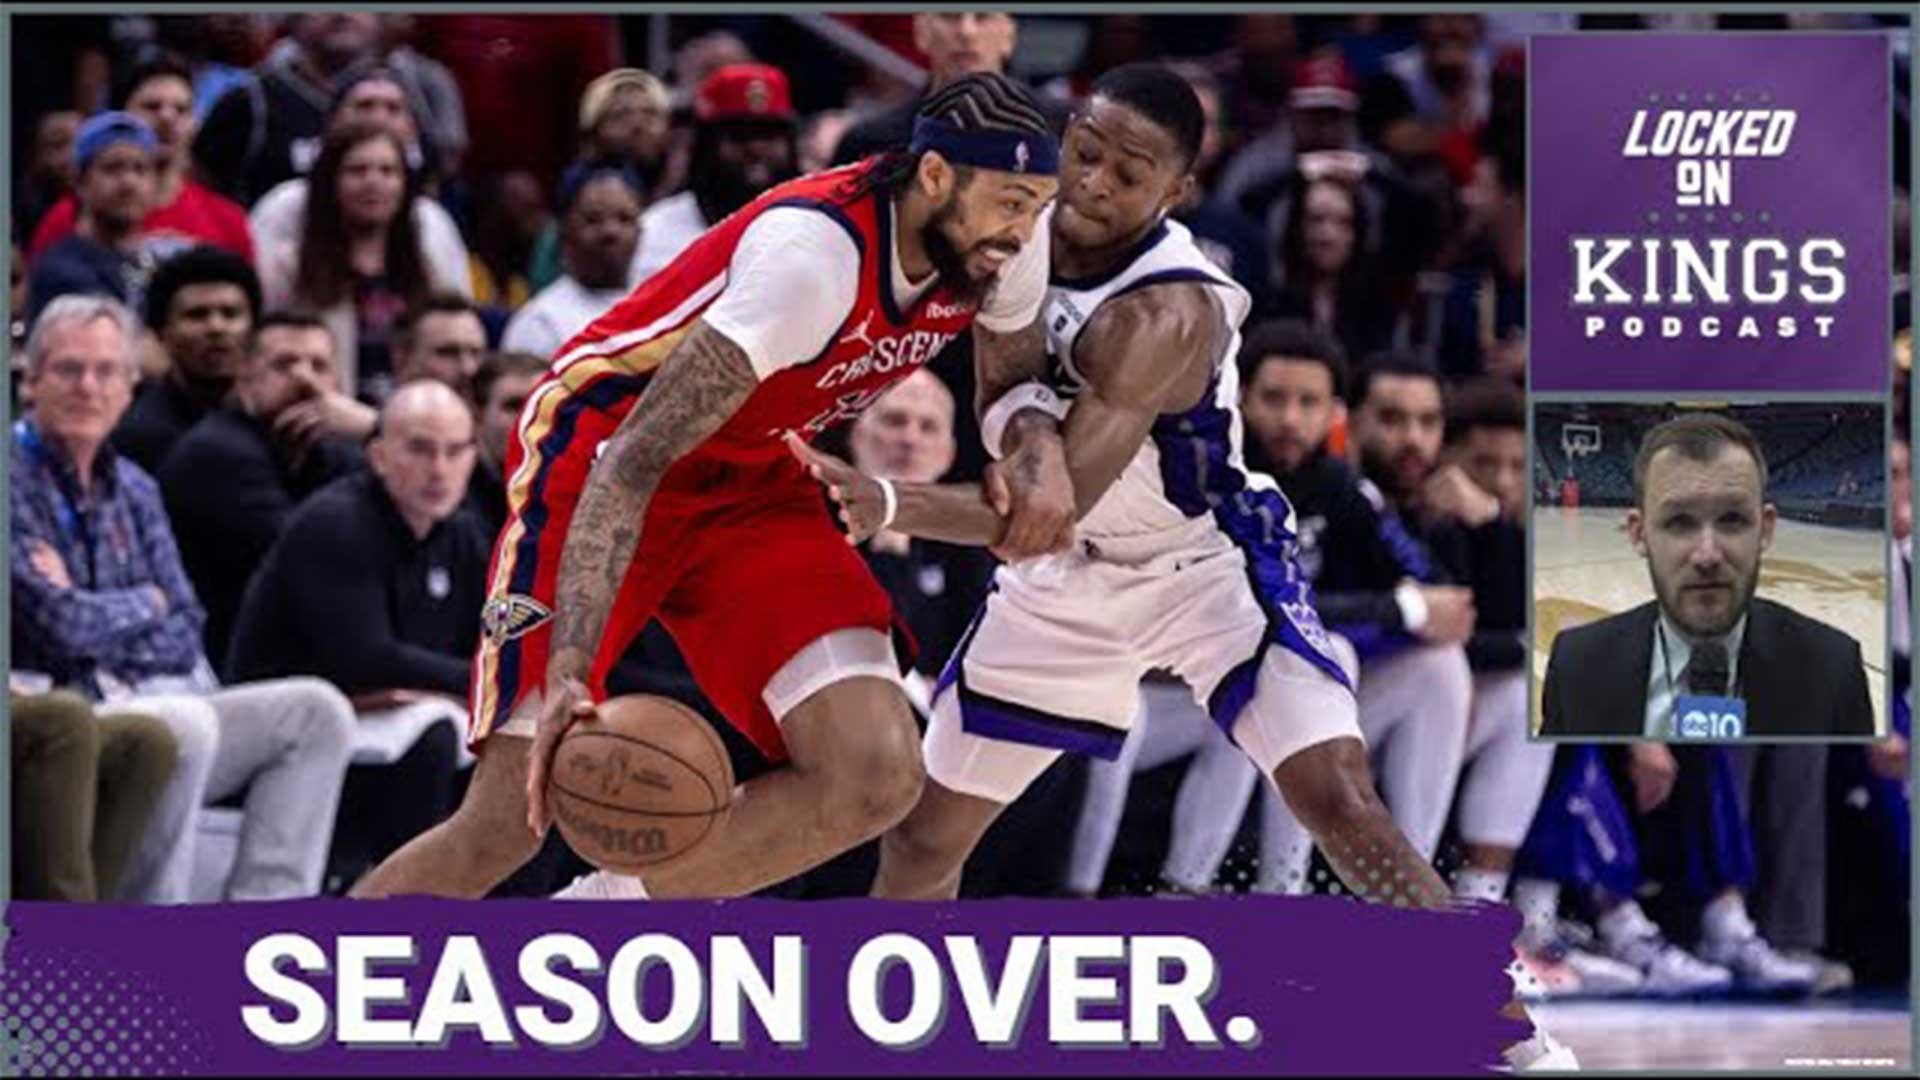 Matt George reacts to the Sacramento Kings season coming to an end at the hands of the New Orleans Pelicans, who defeated Sacramento 6 times in the same season.